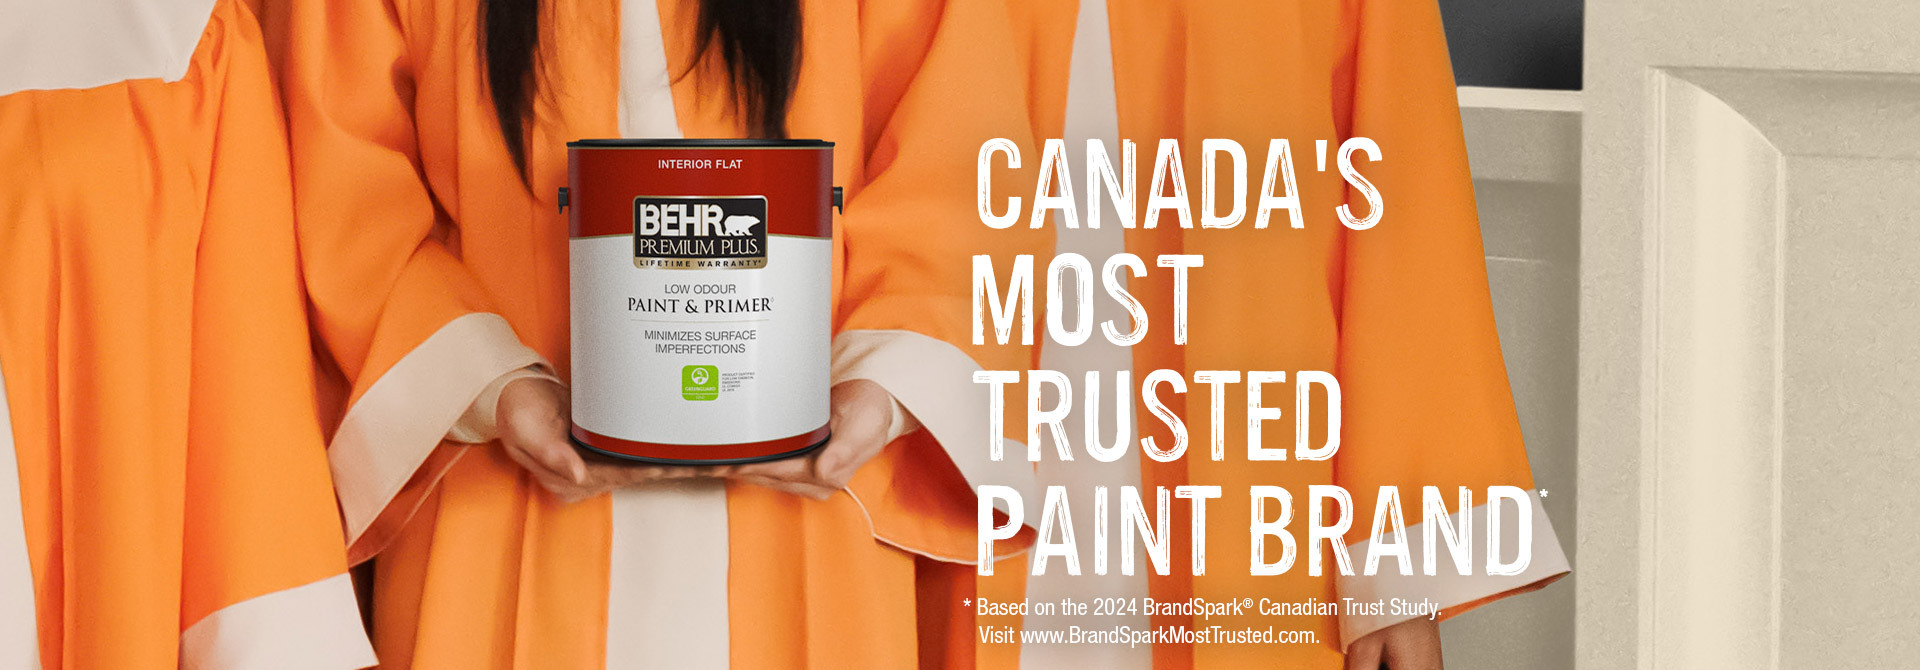 Choir holding a can of Premium Plus Flat interior paint with the words Most Trusted Brand in the foreground